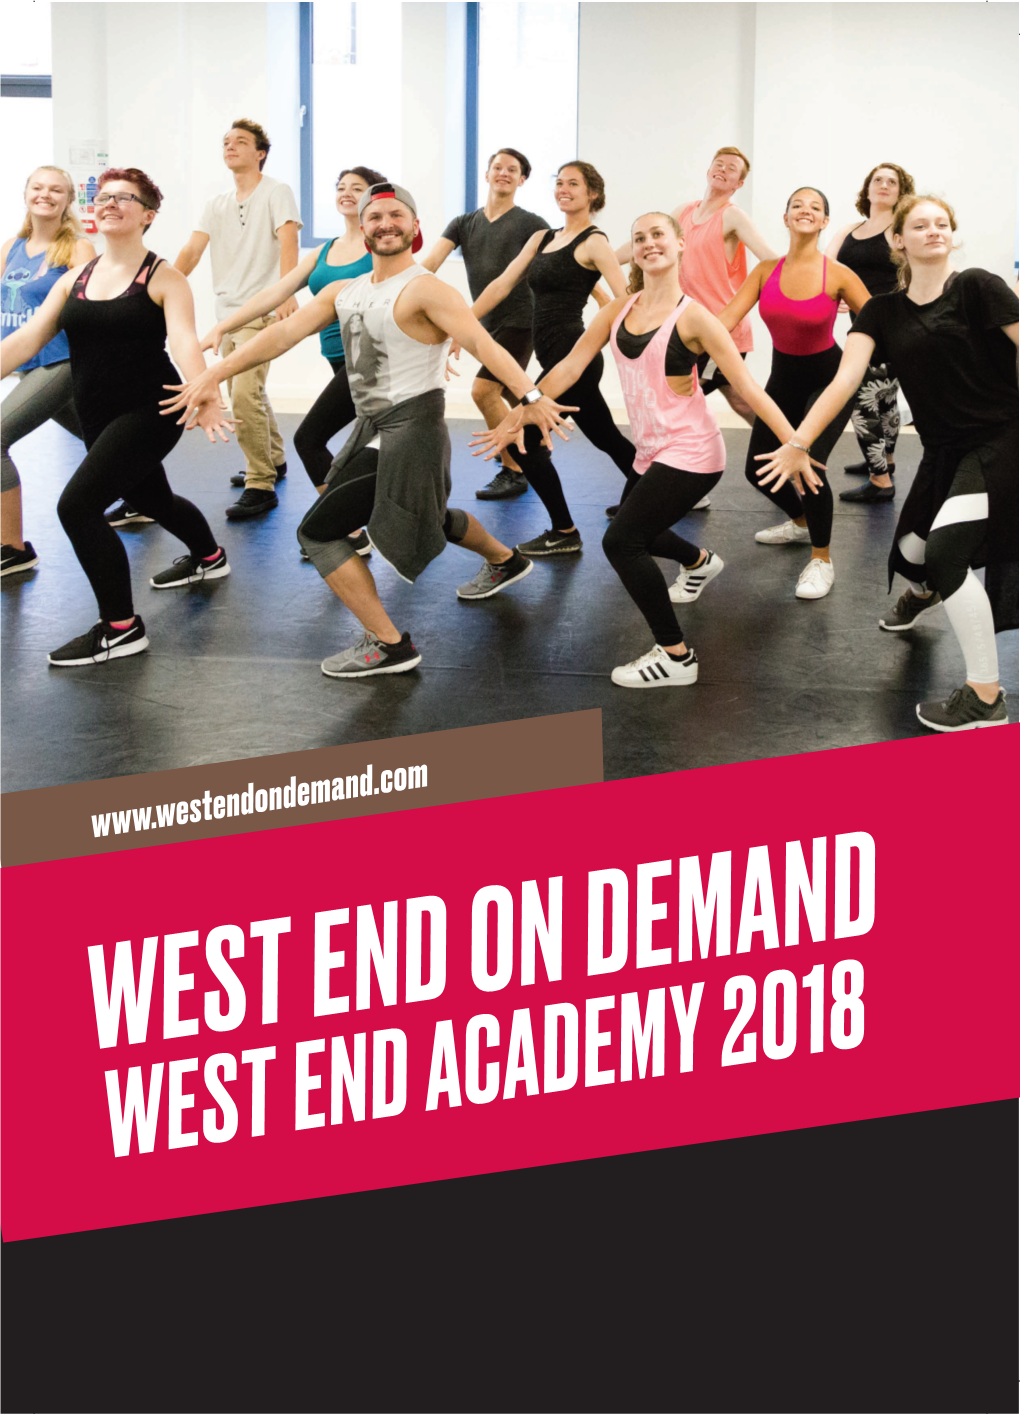 Work with West End Cast Members